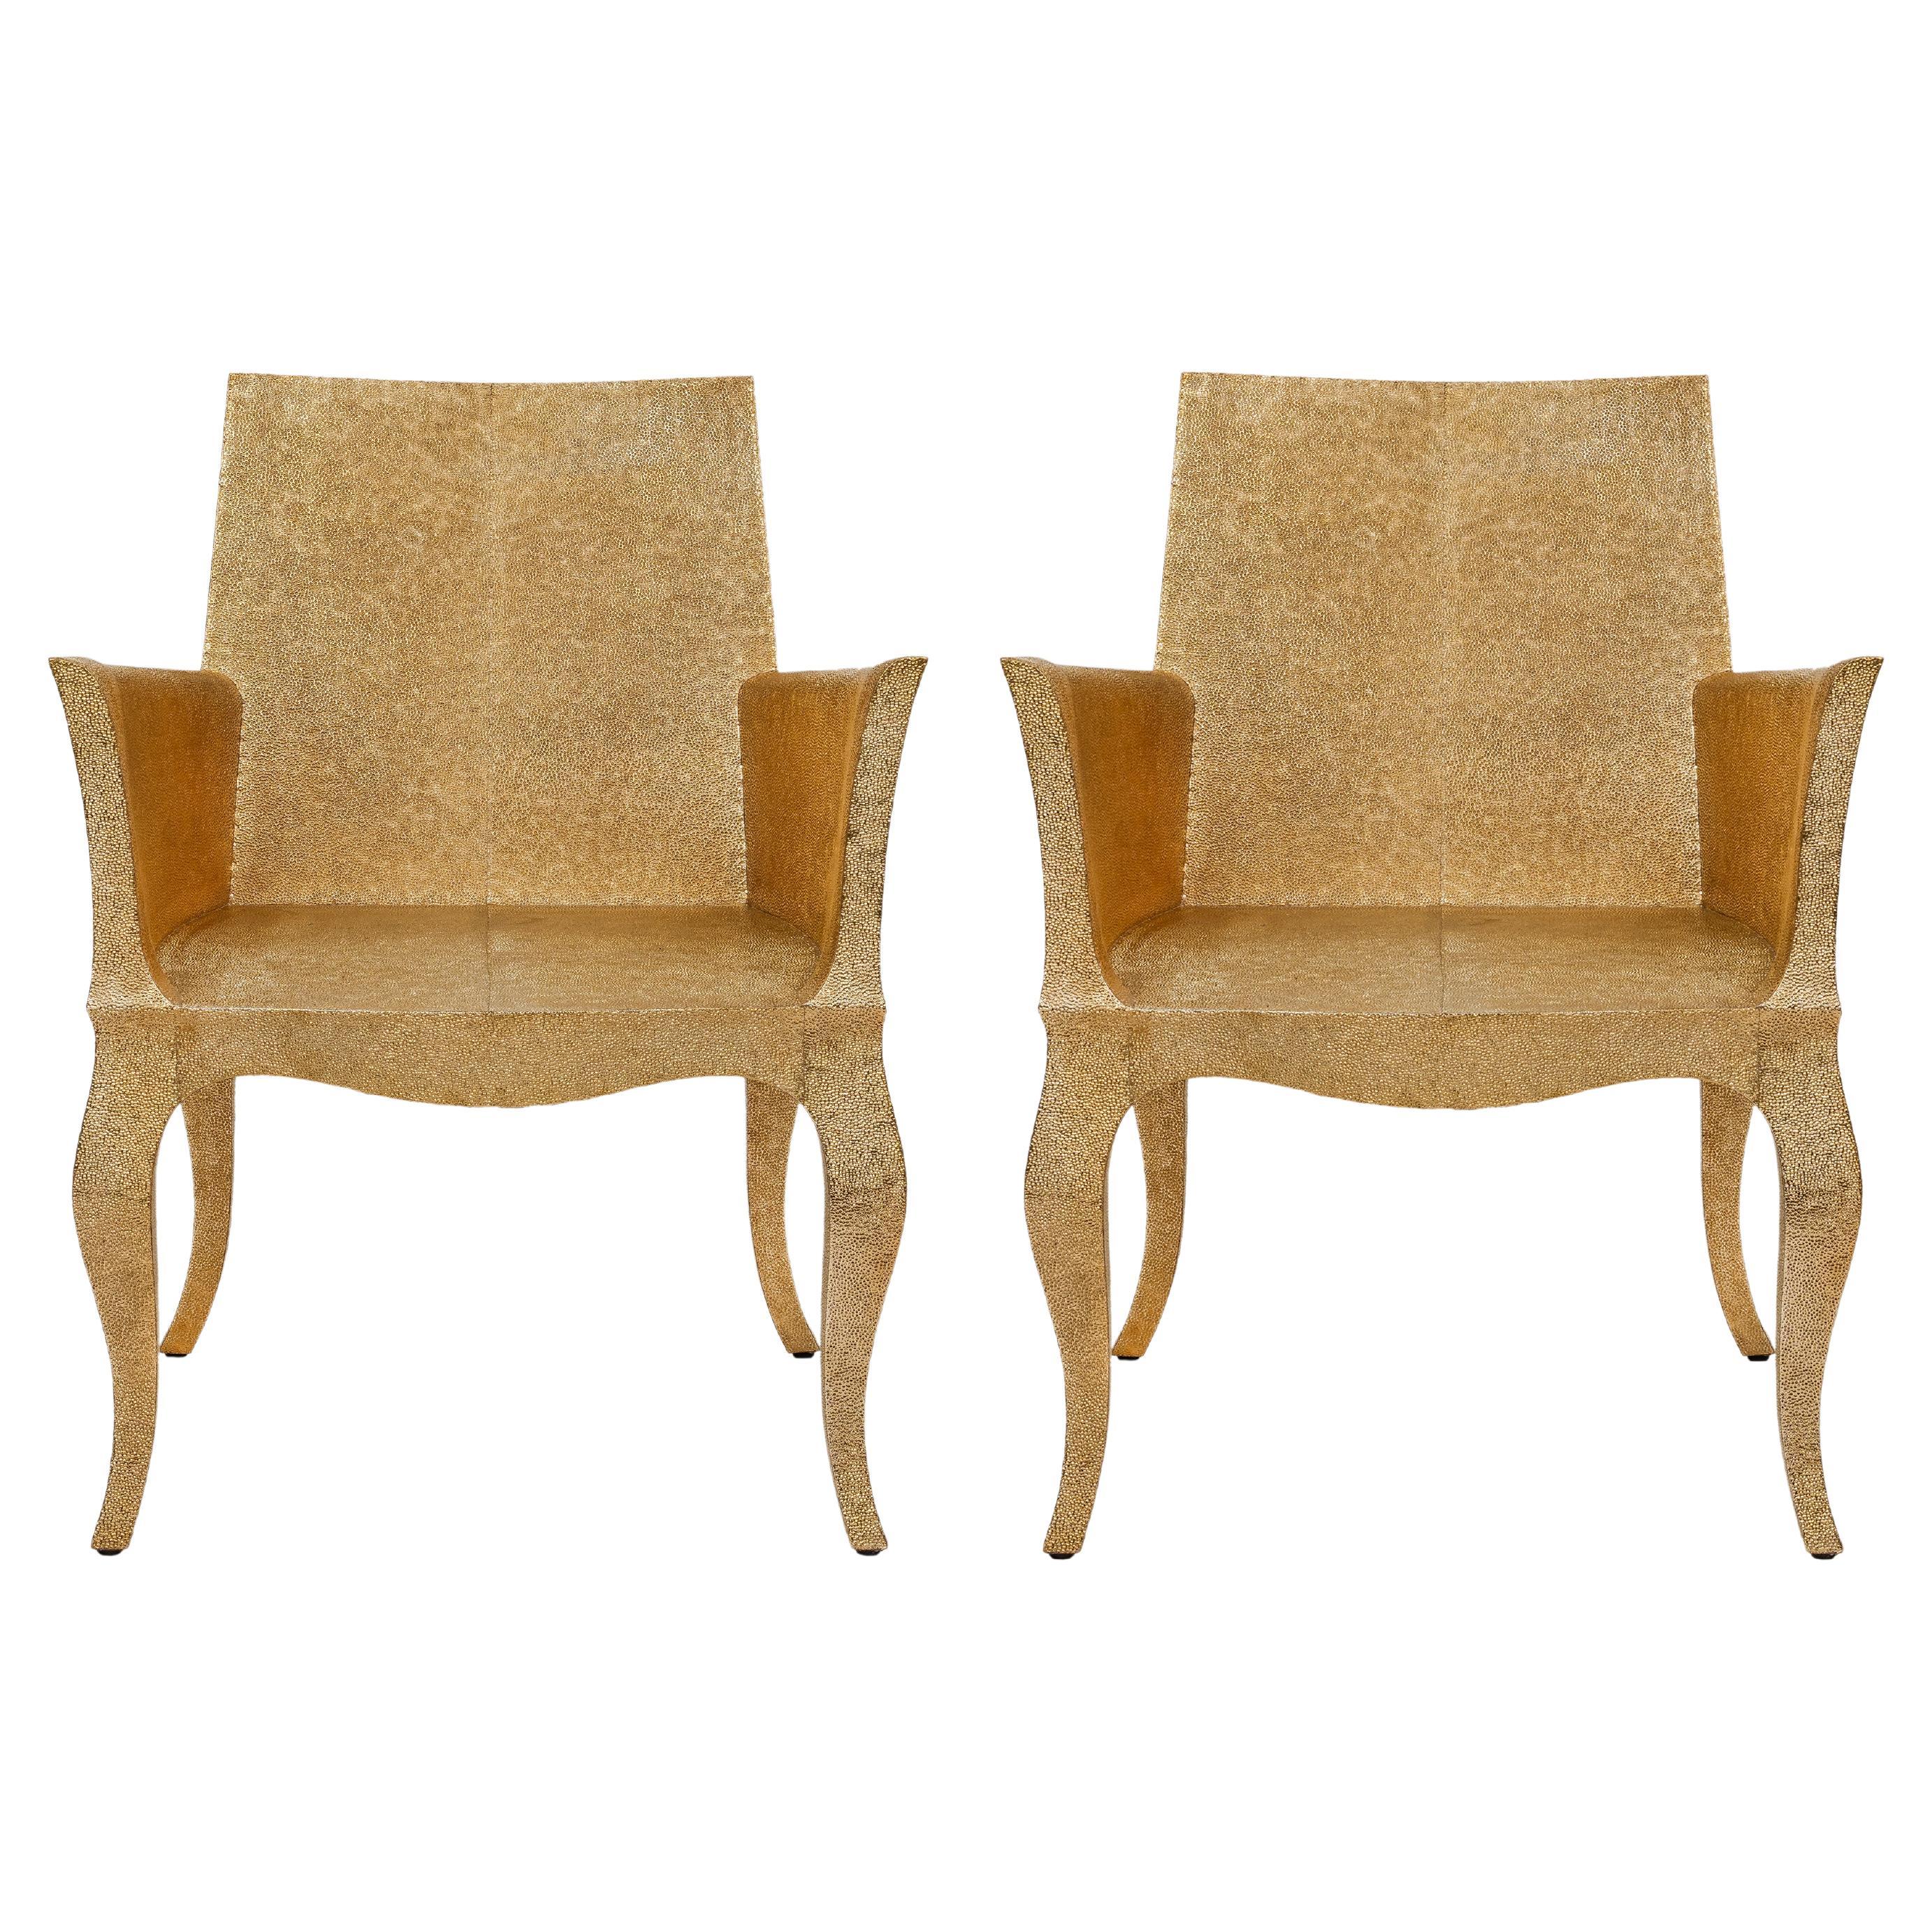 Set of Two Louise Club Chairs in Medium Hammered Brass Over Wood by P. Mathieu For Sale